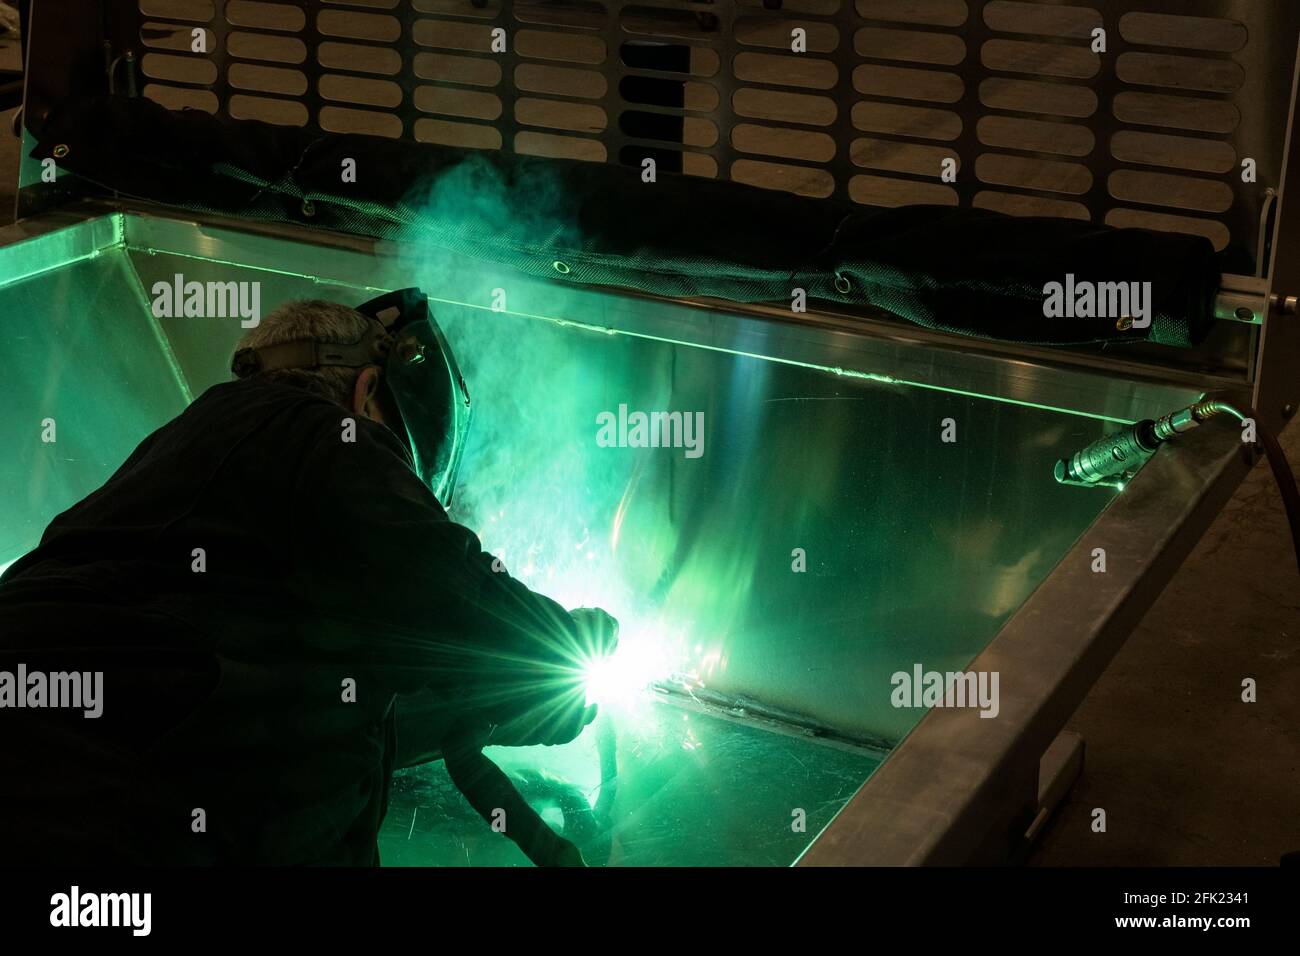 Welder wearing gloves and mask. Photography with welding sparks and smoke. Stock Photo